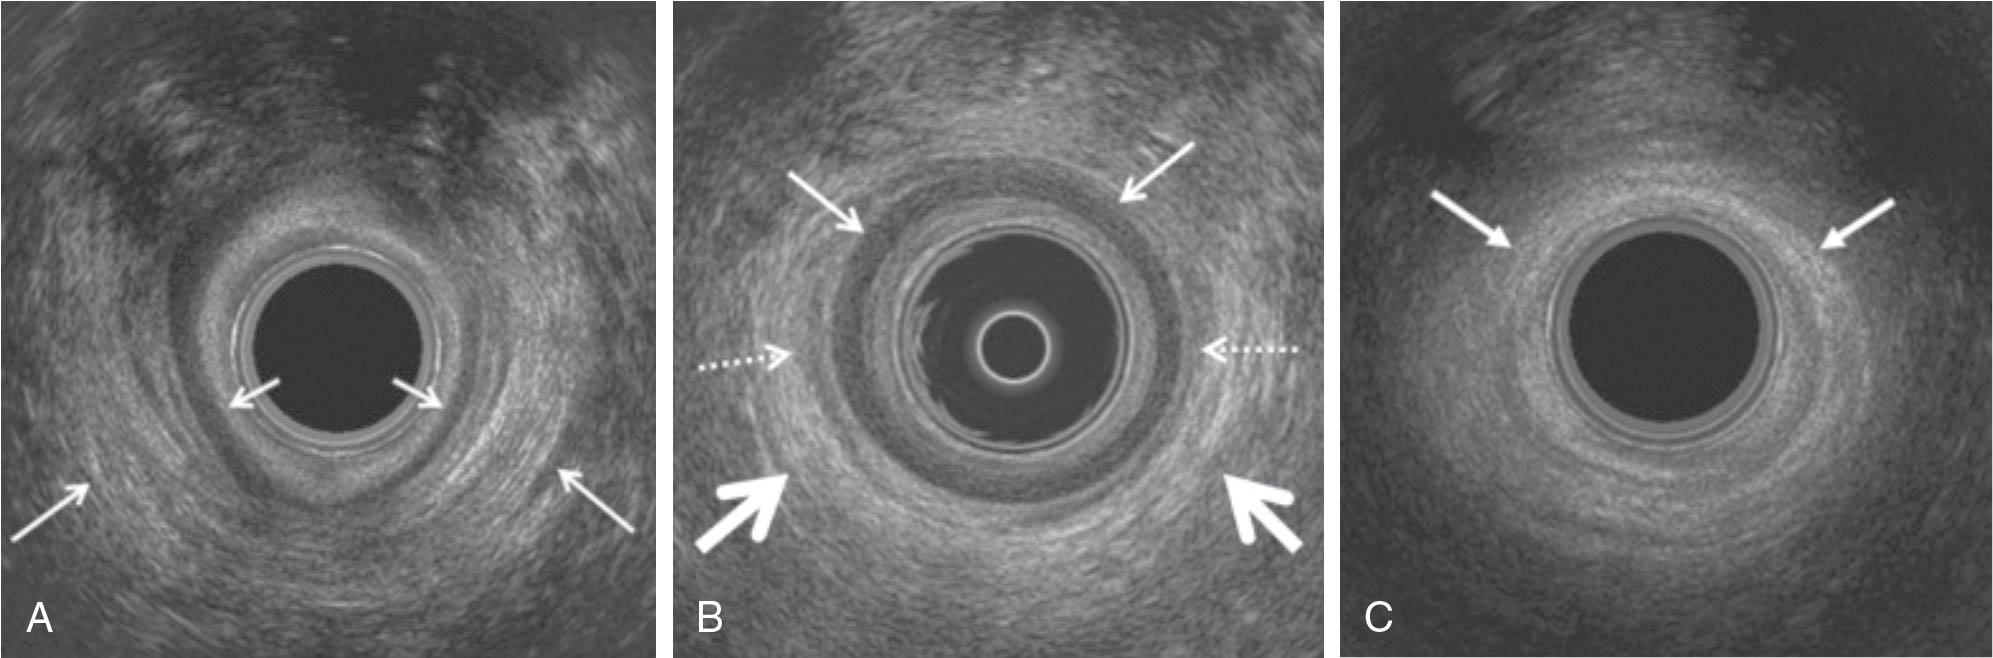 Fig. 22.7, Anal ultrasound. Transverse ultrasound images of the normal anal sphincter. Endoanal ultrasound images at three levels (upper sphincter, midsphincter, and caudal sphincter) at the level of the puborectalis muscle (PRM) shows the internal sphincter, intersphincteric fat, and external sphincter as separate structures. A, Endoanal ultrasound image: transverse image of the cephalad (upper) anal sphincter demonstrating the striated relatively echogenic U -shaped sling of the posterior PRM (long arrows) and the hypoechoic internal anal sphincter (IAS) (short arrows). Note that at this level the external anal sphincter (EAS) is absent. The innermost echogenic ring represents the rectal mucosa and interface with the transducer (central round black structure). B, Normal appearance on endoanal ultrasound of the anal sphincters at the midsphincteric level demonstrating the characteristic target or layered appearance. The inner echogenic ring represents the mucosa and interface with the transducer; the IAS is the subjacent markedly hypoechoic ring (thin arrows), and the outermost ring represents the EAS (thick arrows) and is typically either hyperechoic or of mixed echogenicity. Wispy hypoechoic curvilinear strands with a striated appearance (dotted arrows) between the IAS and EAS represent the longitudinal muscle layer. C, Endoanal ultrasound image: transverse image of the normal caudal or distal anal sphincter image where the echogenic EAS (arrows) extends beyond the IAS, representing the superficial portion of the EAS.